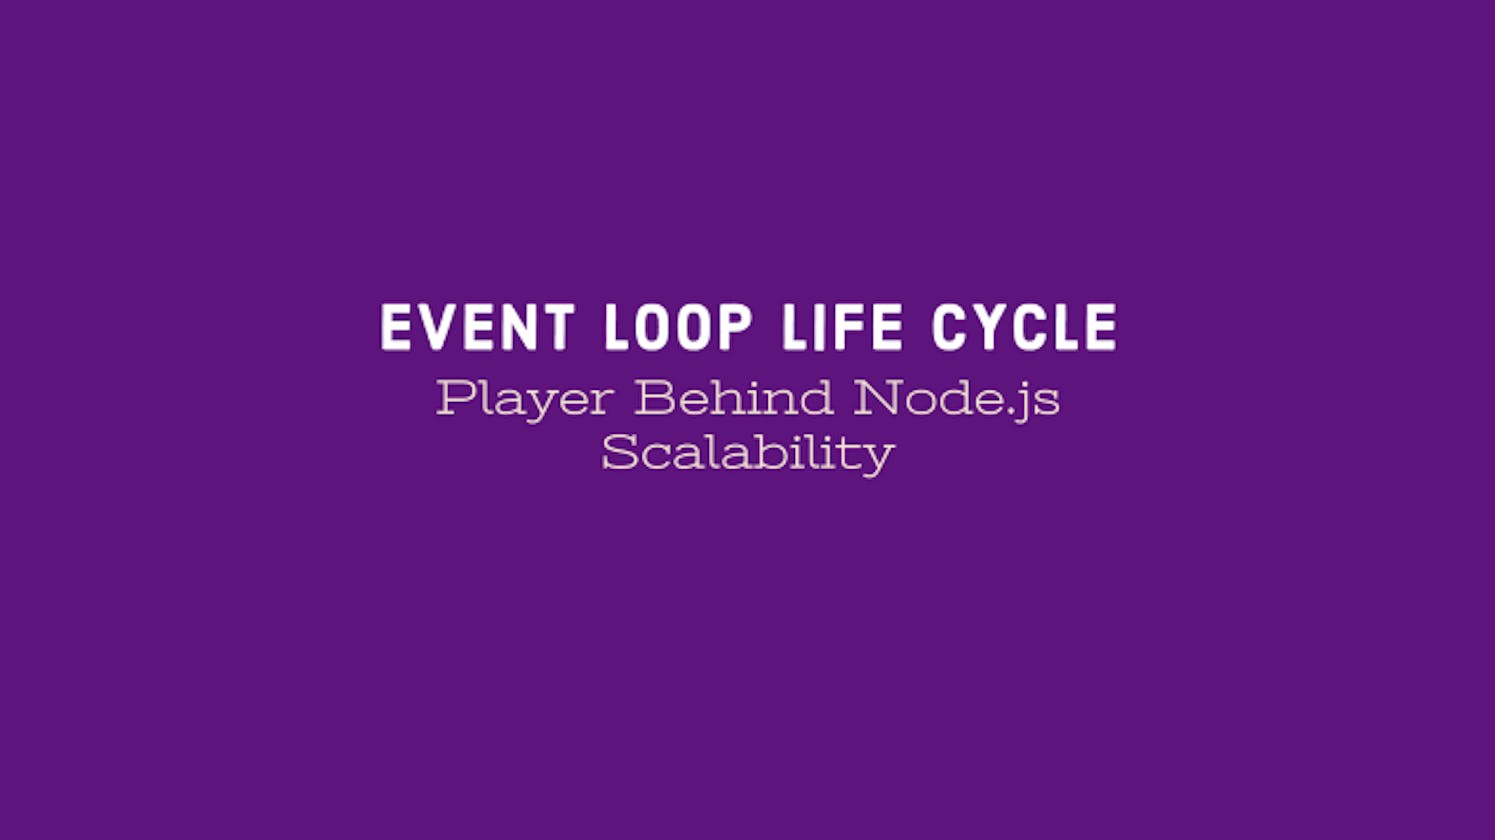 Node.js Internals: Lifecycle of the Event Loop